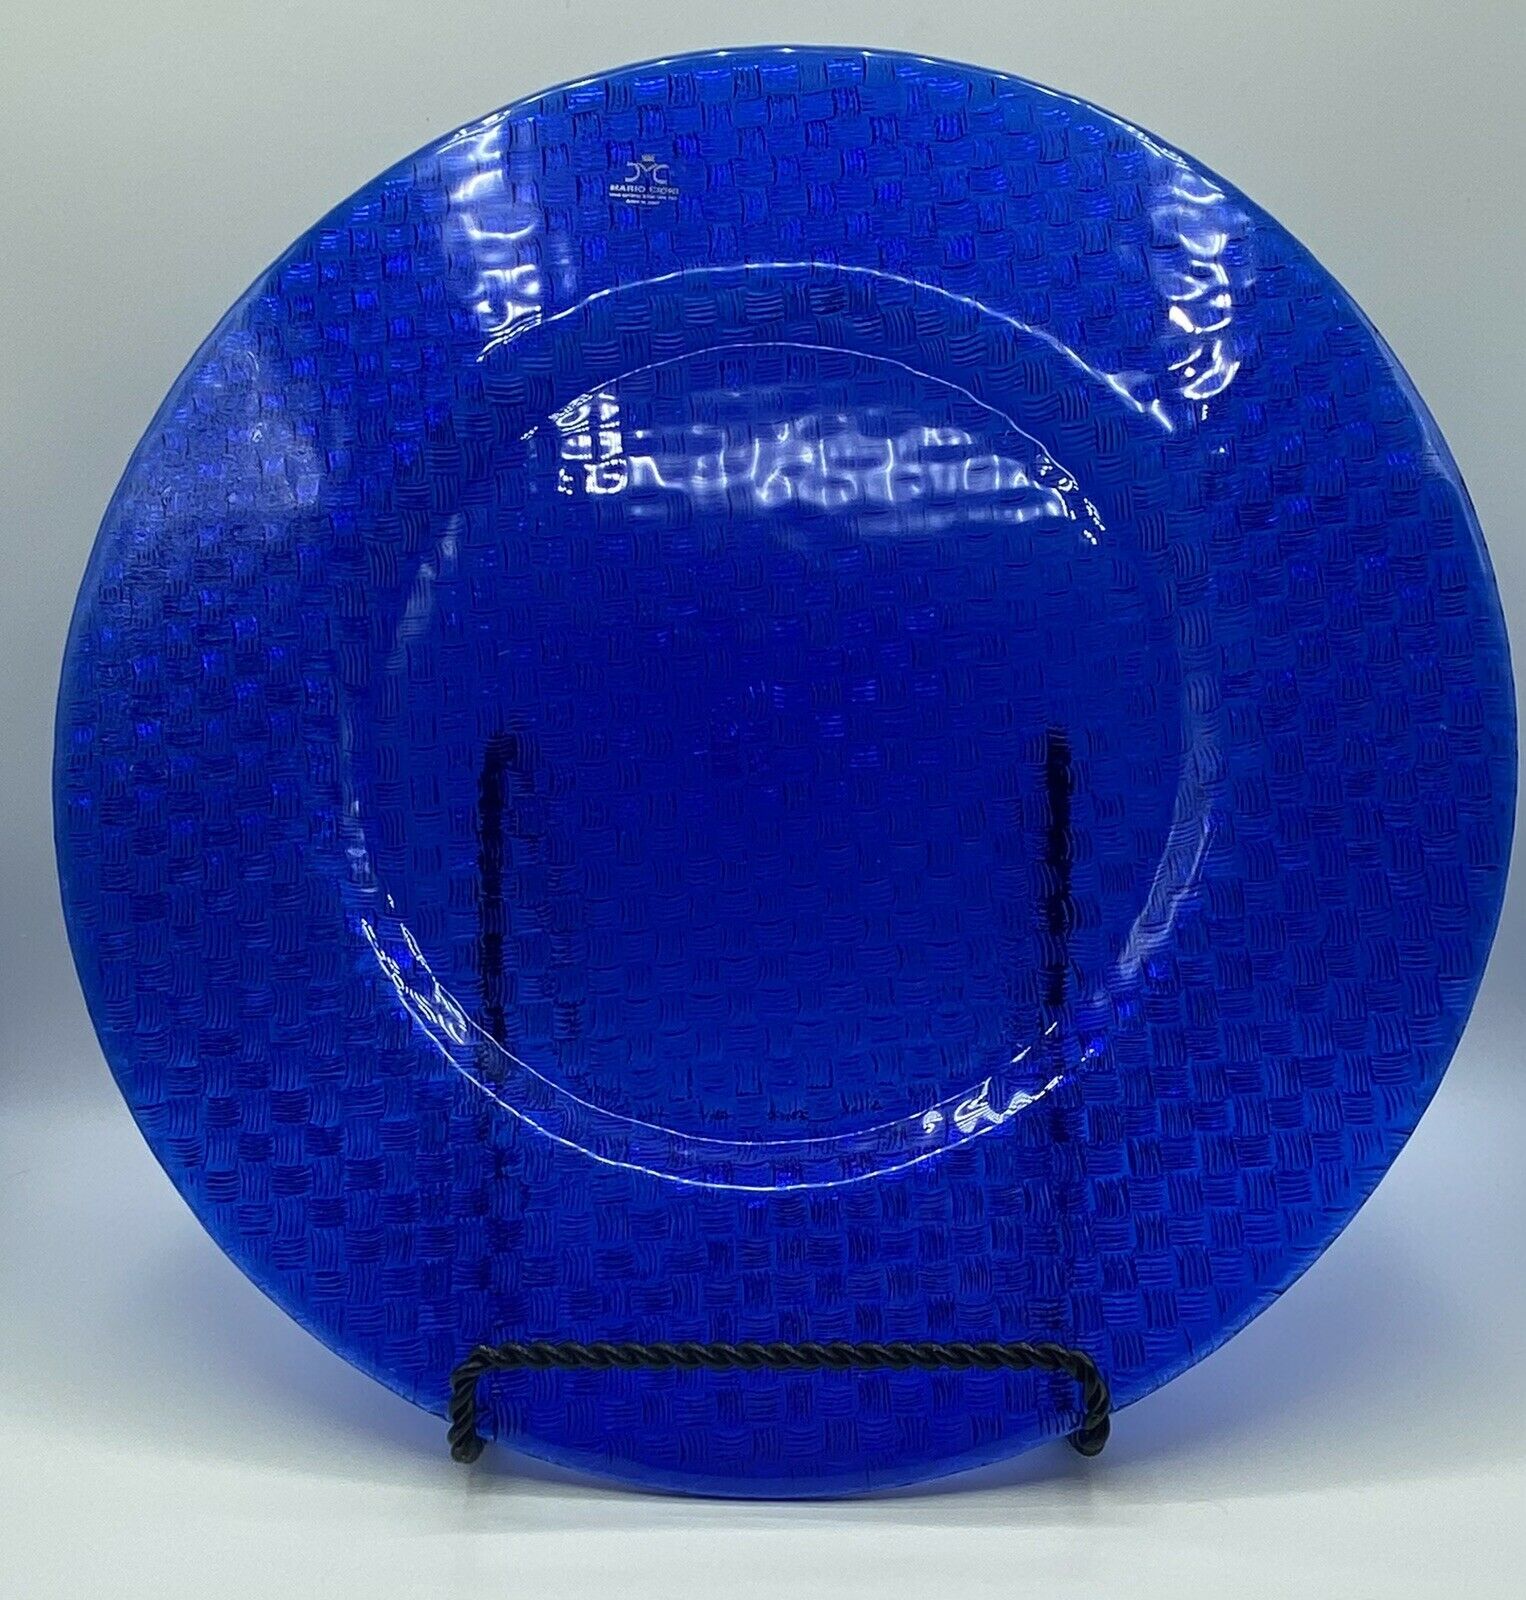 Cobalt Blue Lead Crystal Over 24% Pbo Serving Platter Art Glass By Mario Cioni